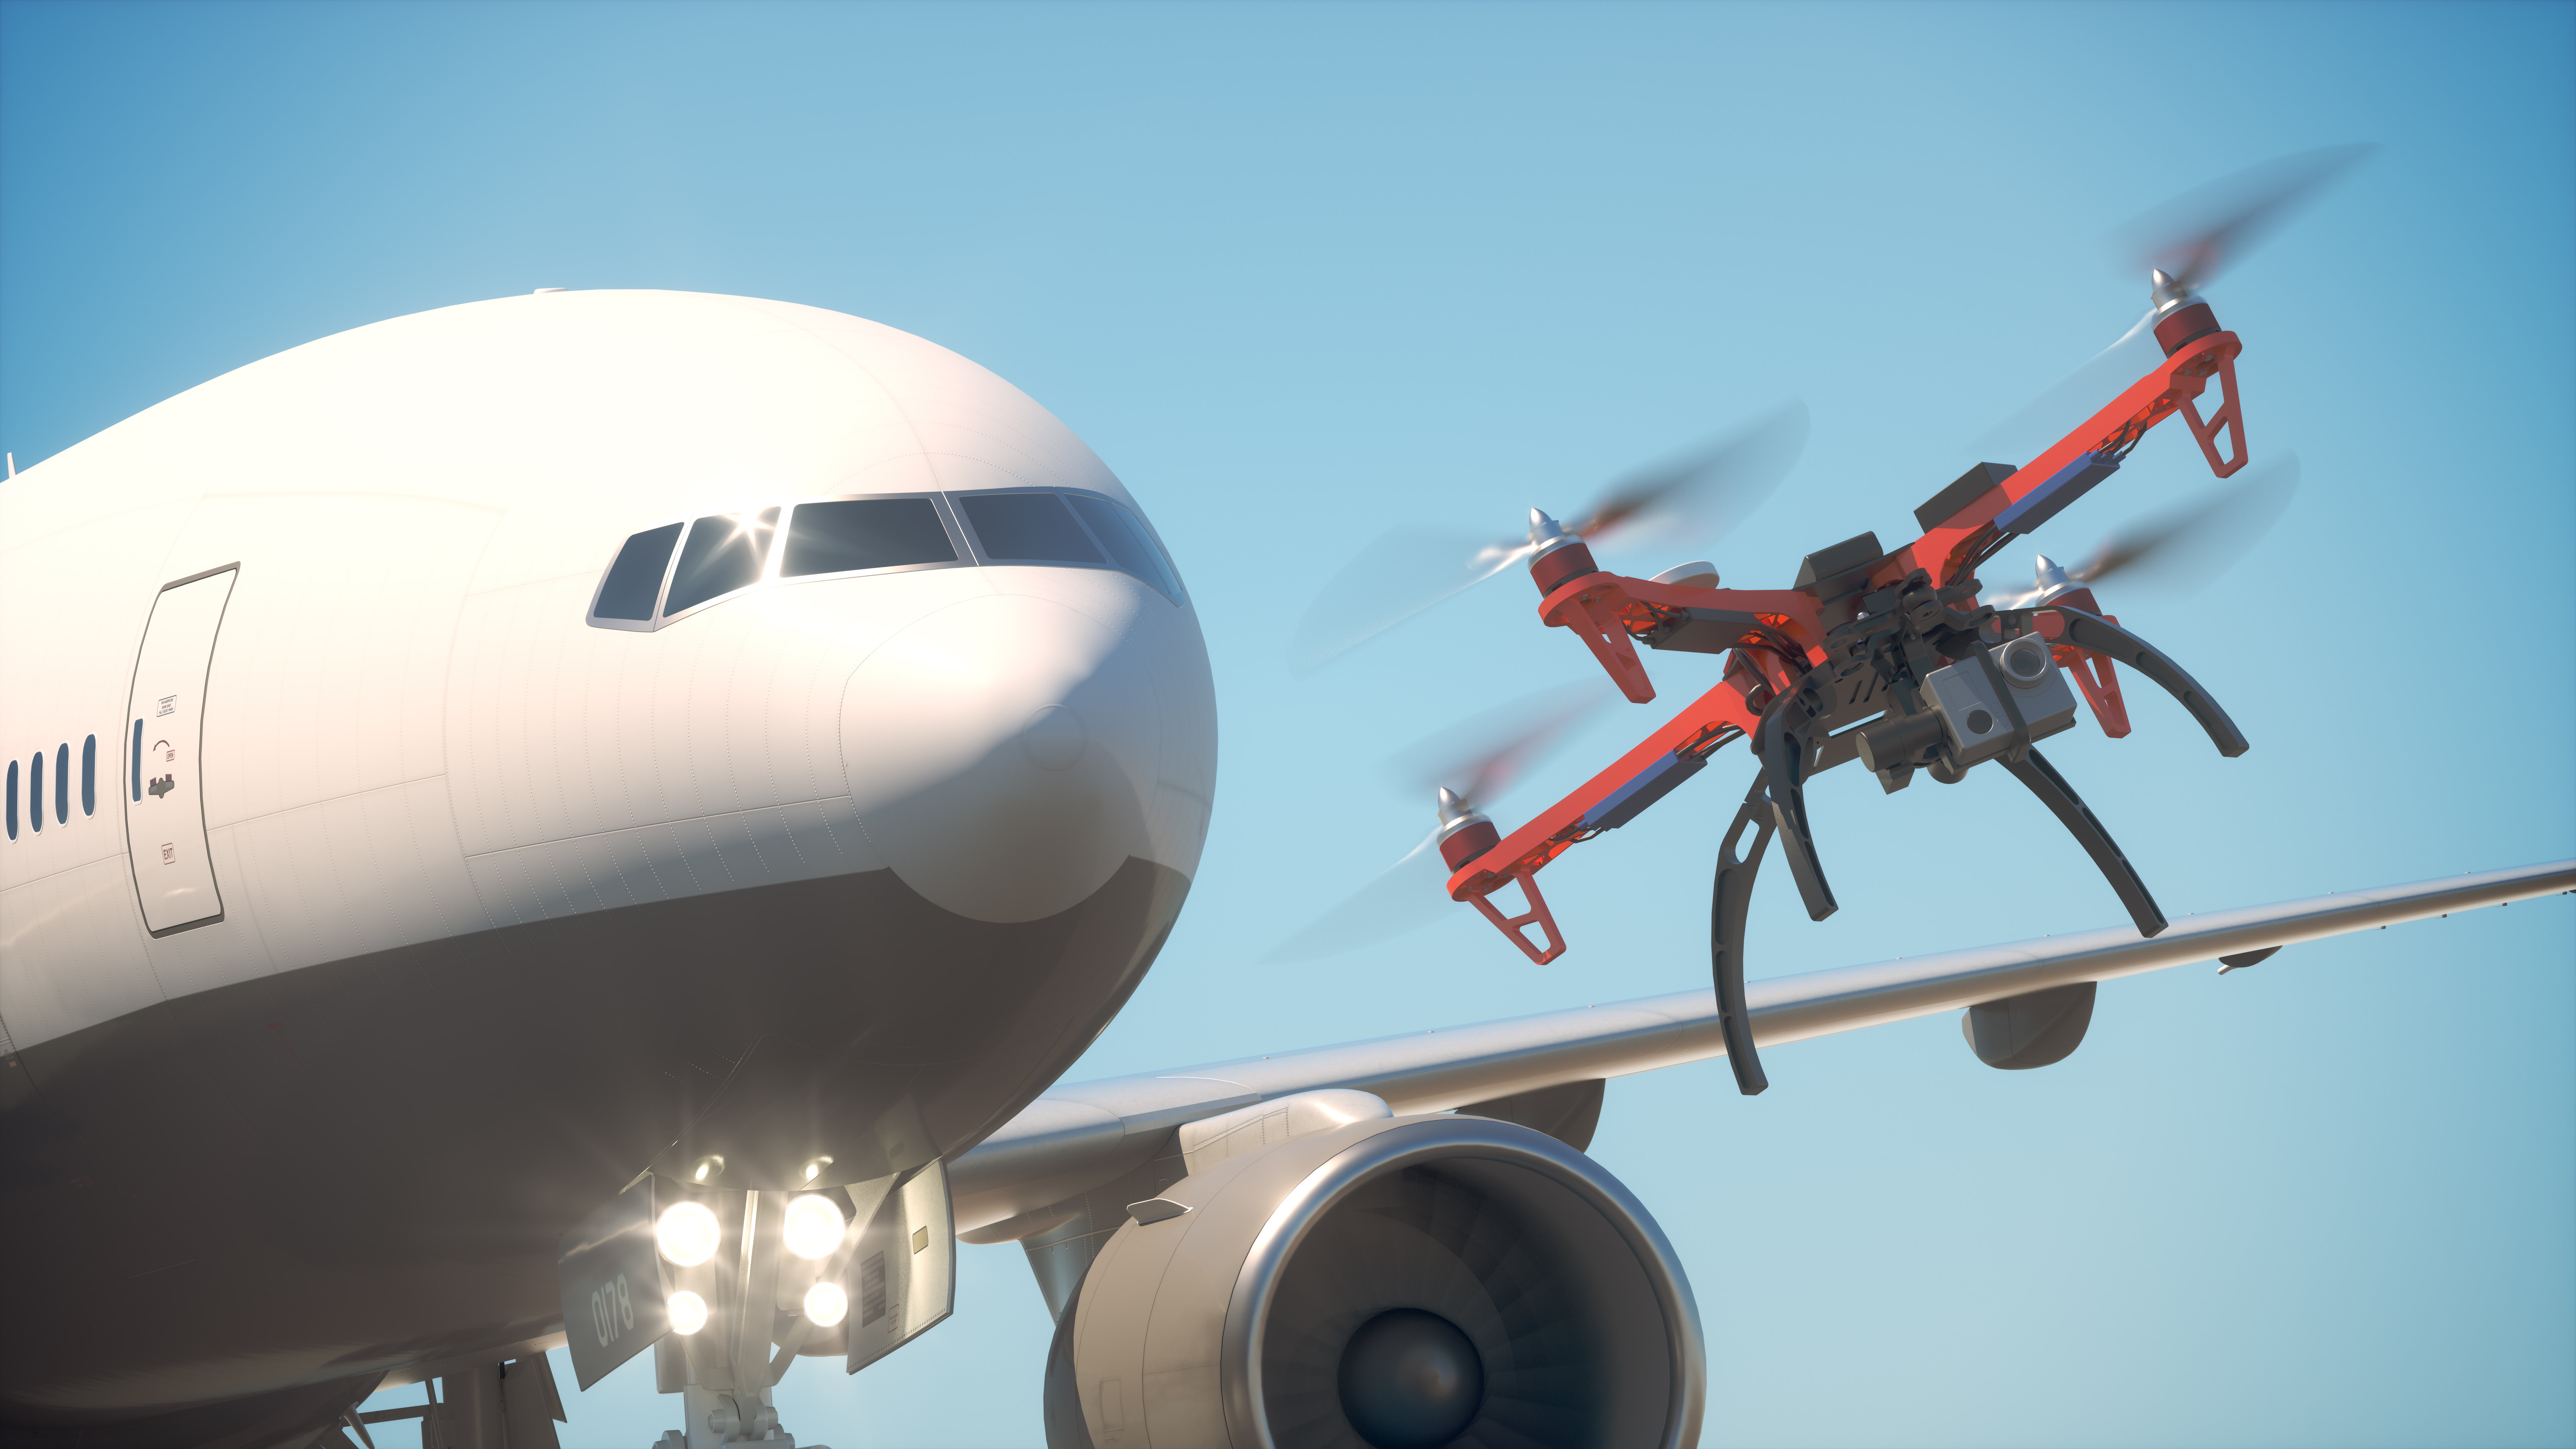 Airport drones to support the de-/anti-icing of aircrafts on ground